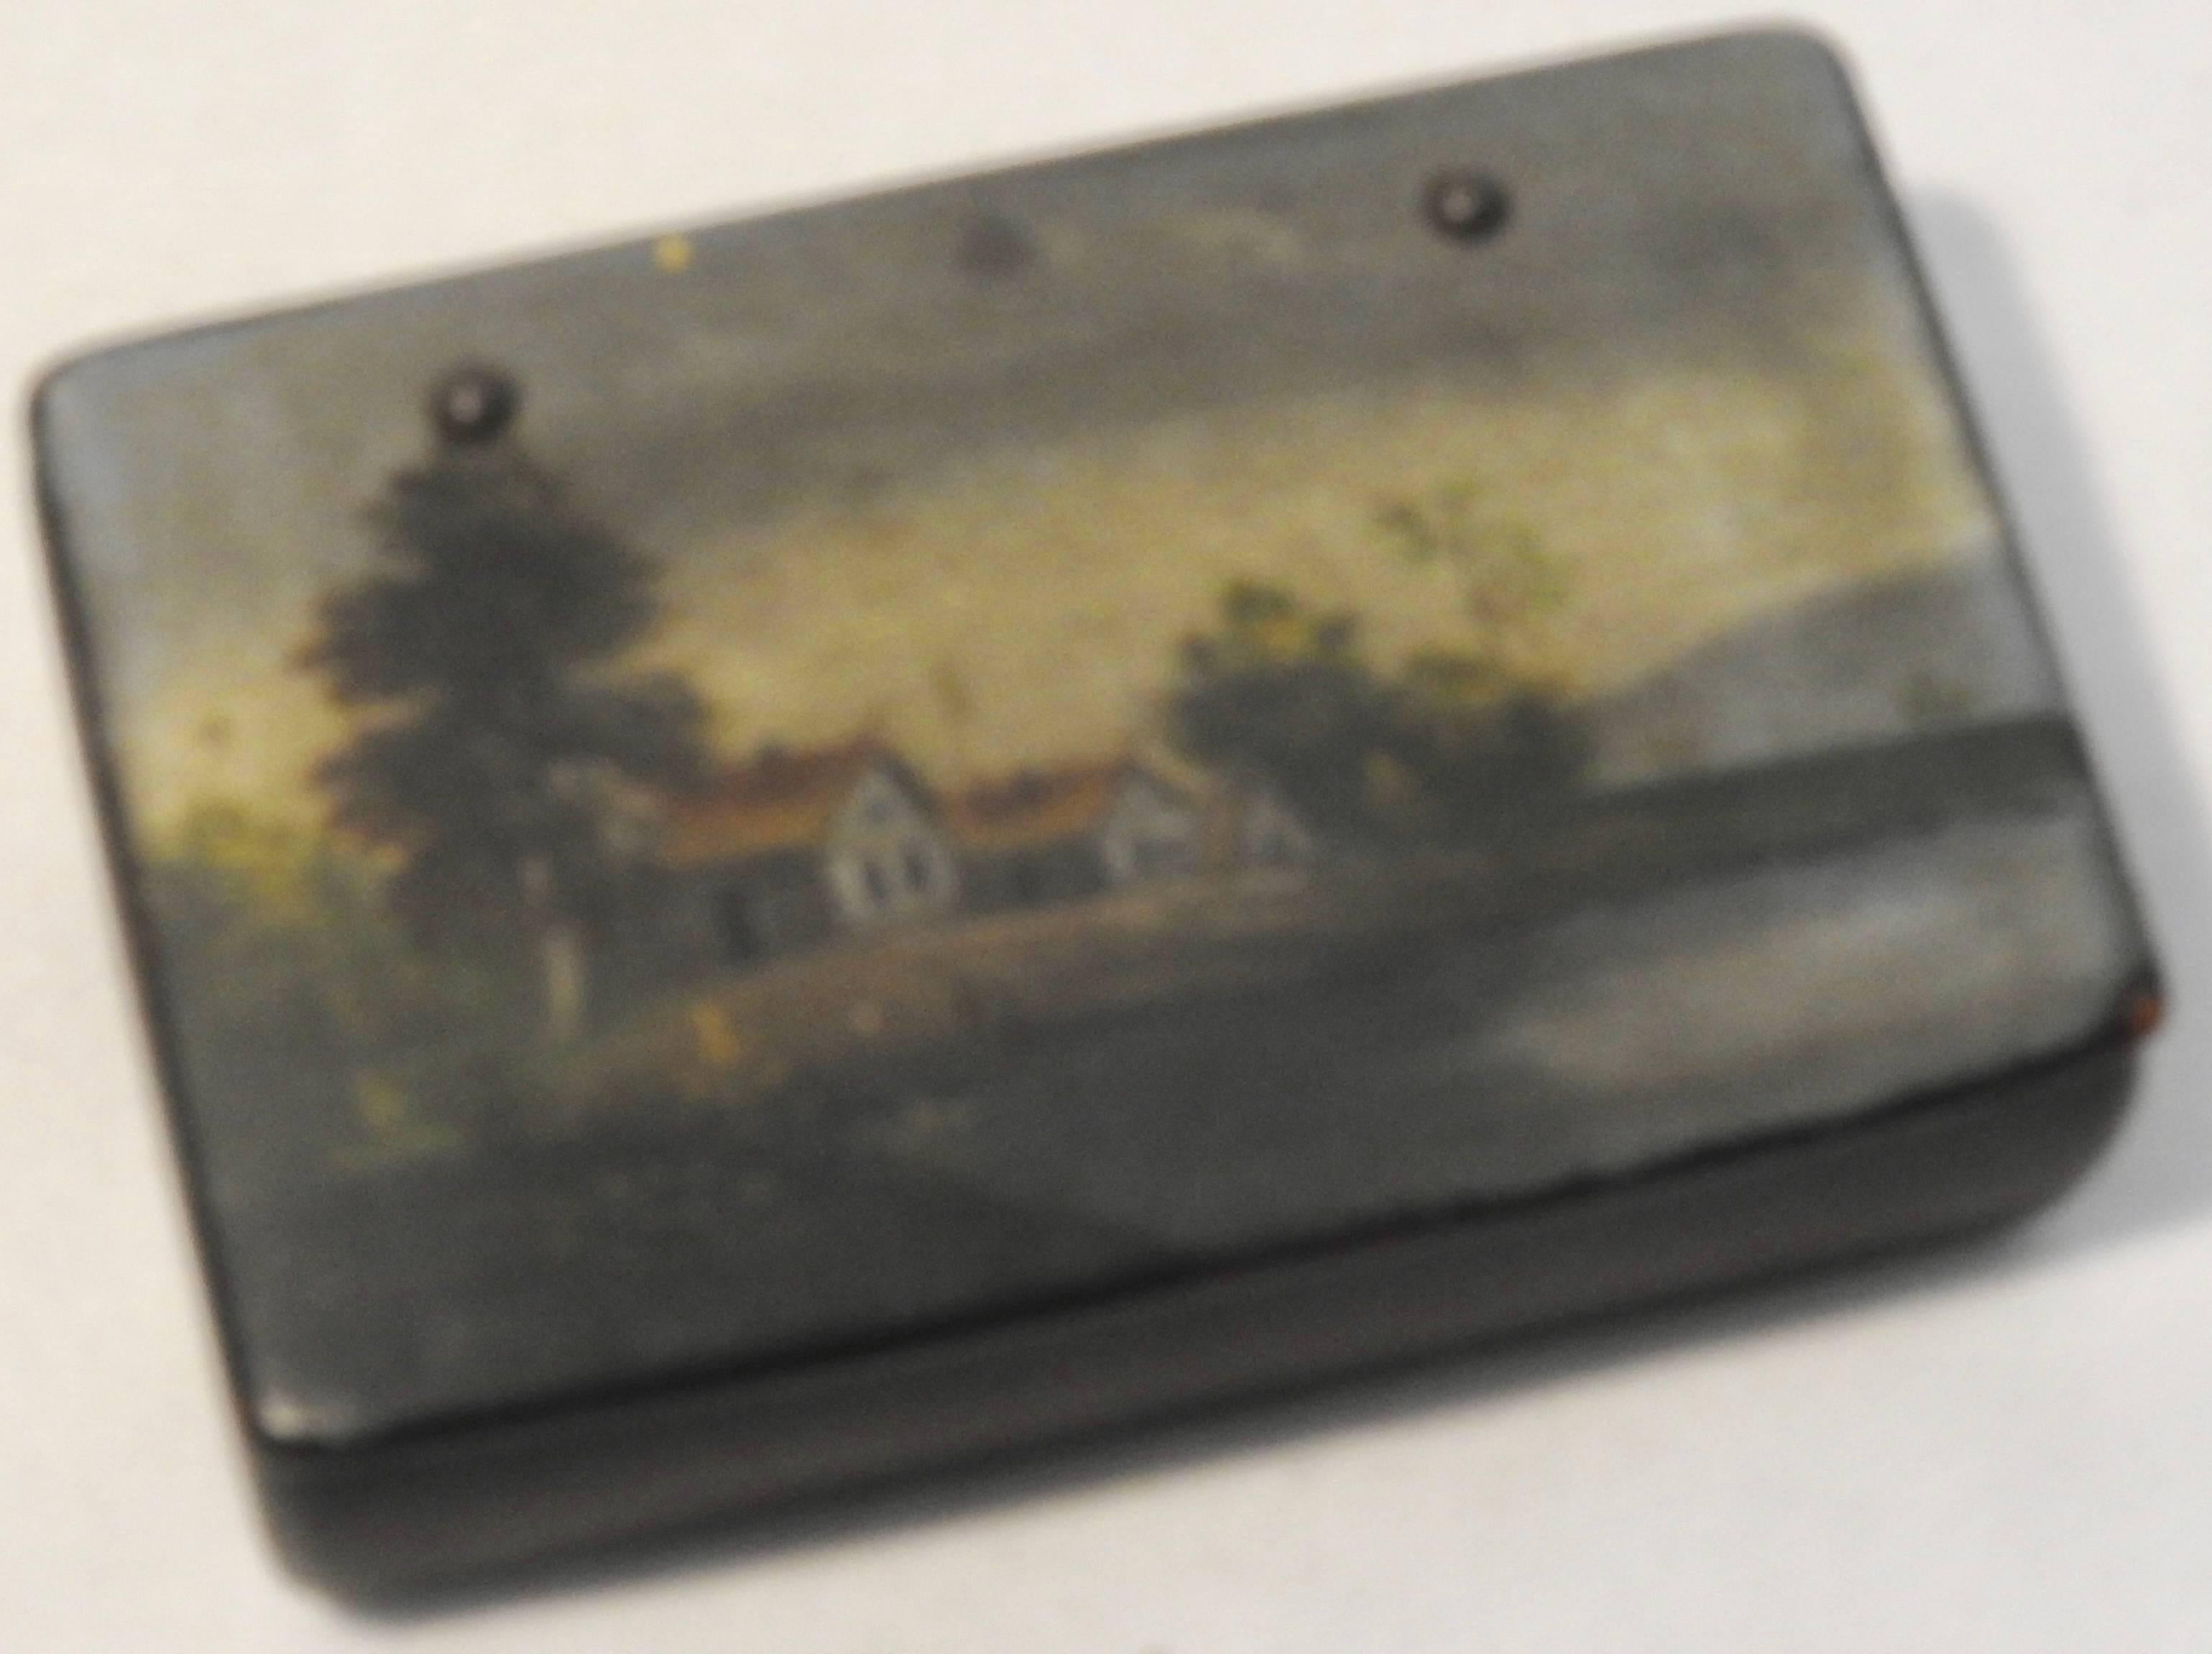 We are offering an antique black lacquer box from Russia with a hand painted landscape scene. It features a house along the banks of a river, surrounded by trees. The hinge is attached with brads.